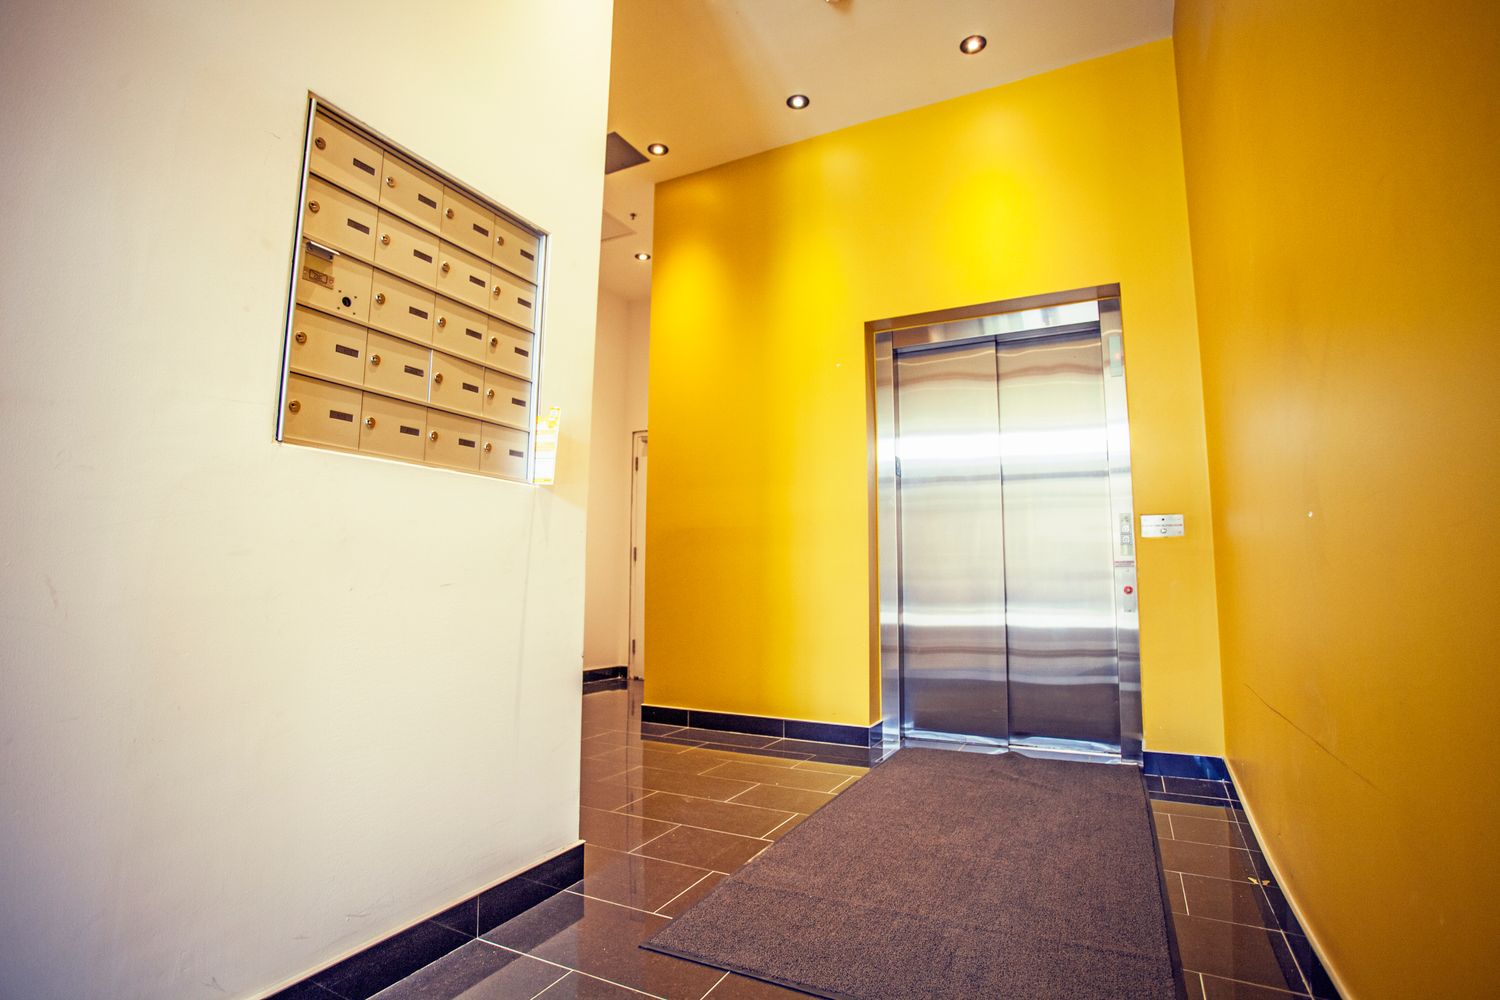 51 Lady Bank Road. The Hive Lofts is located in  Etobicoke, Toronto - image #5 of 6